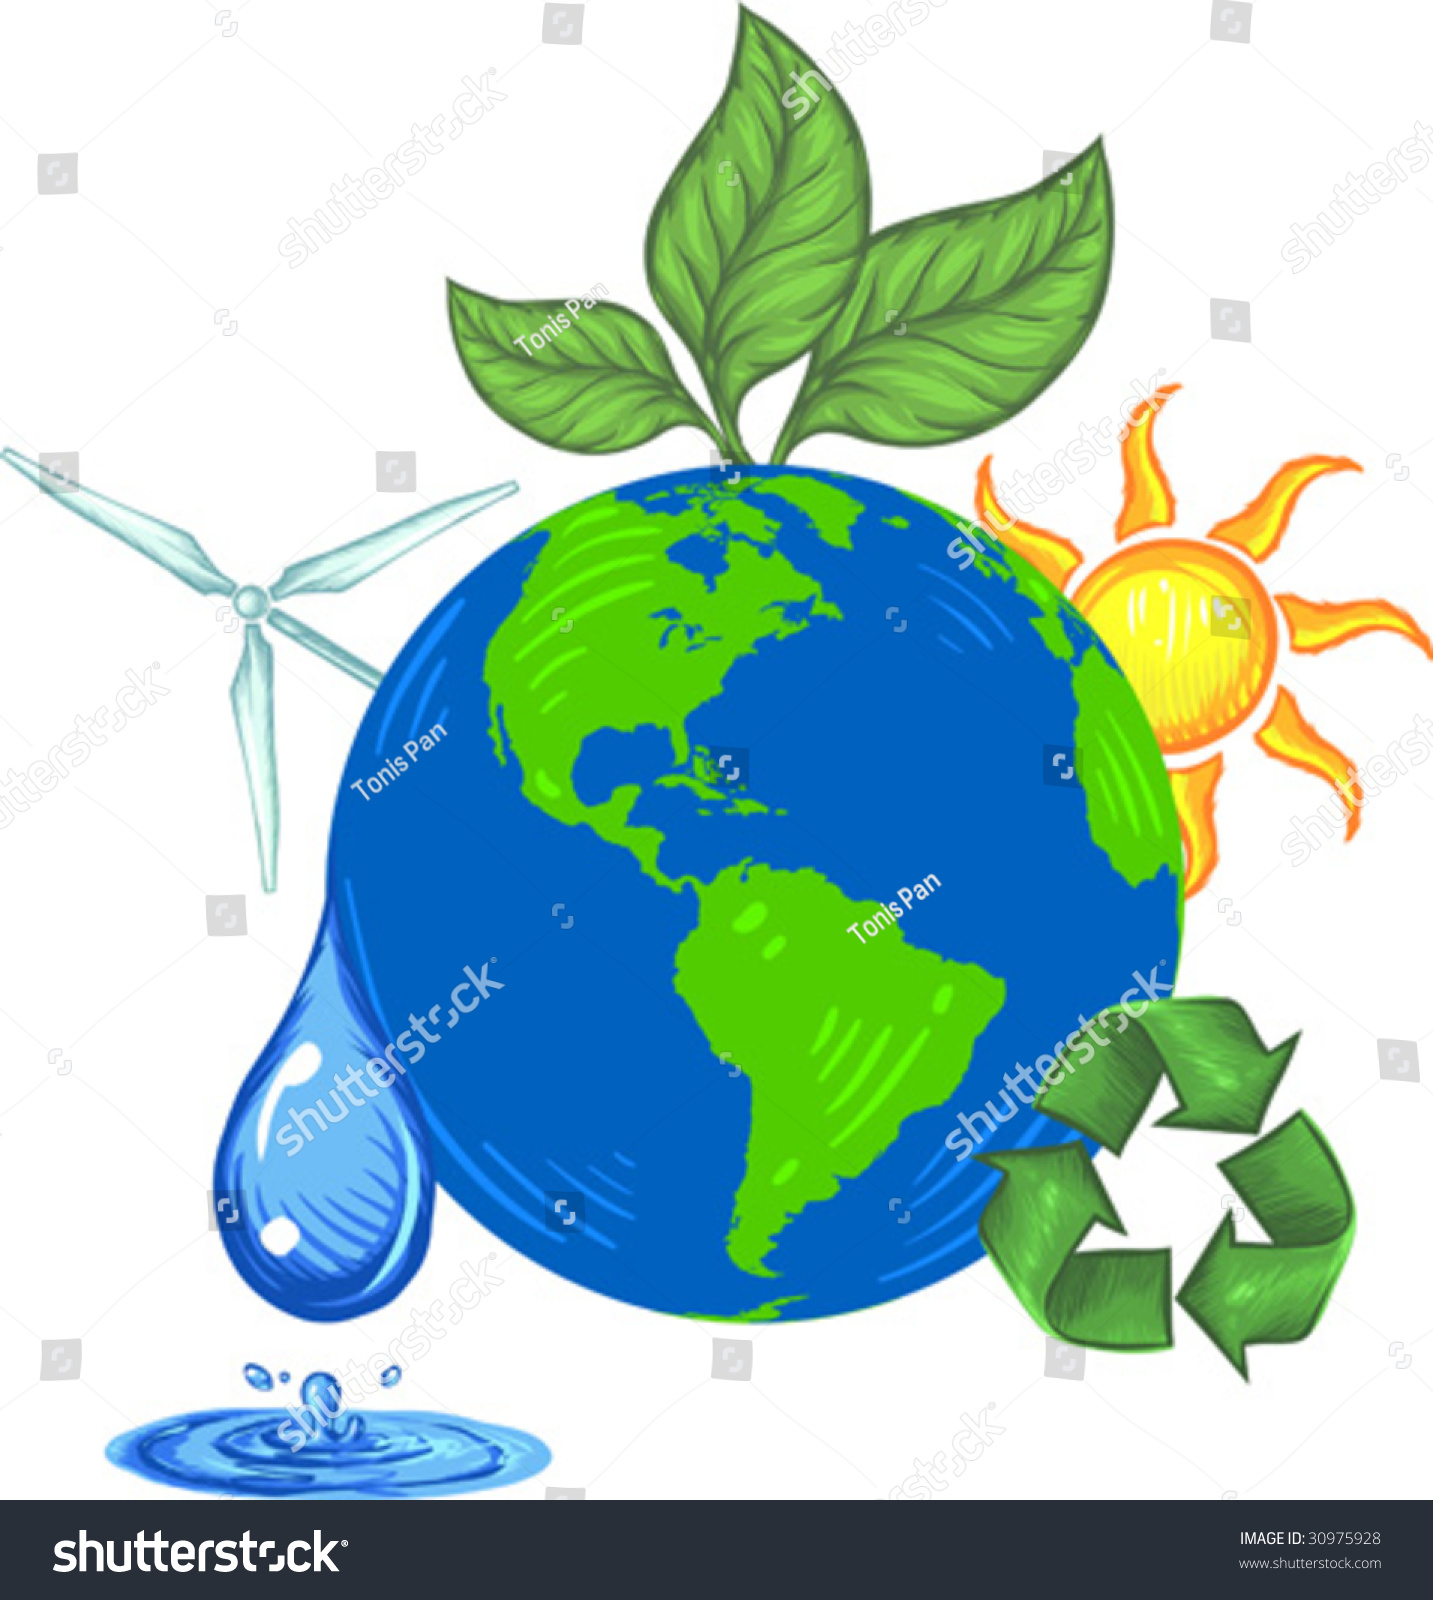 clipart save the earth - photo #37